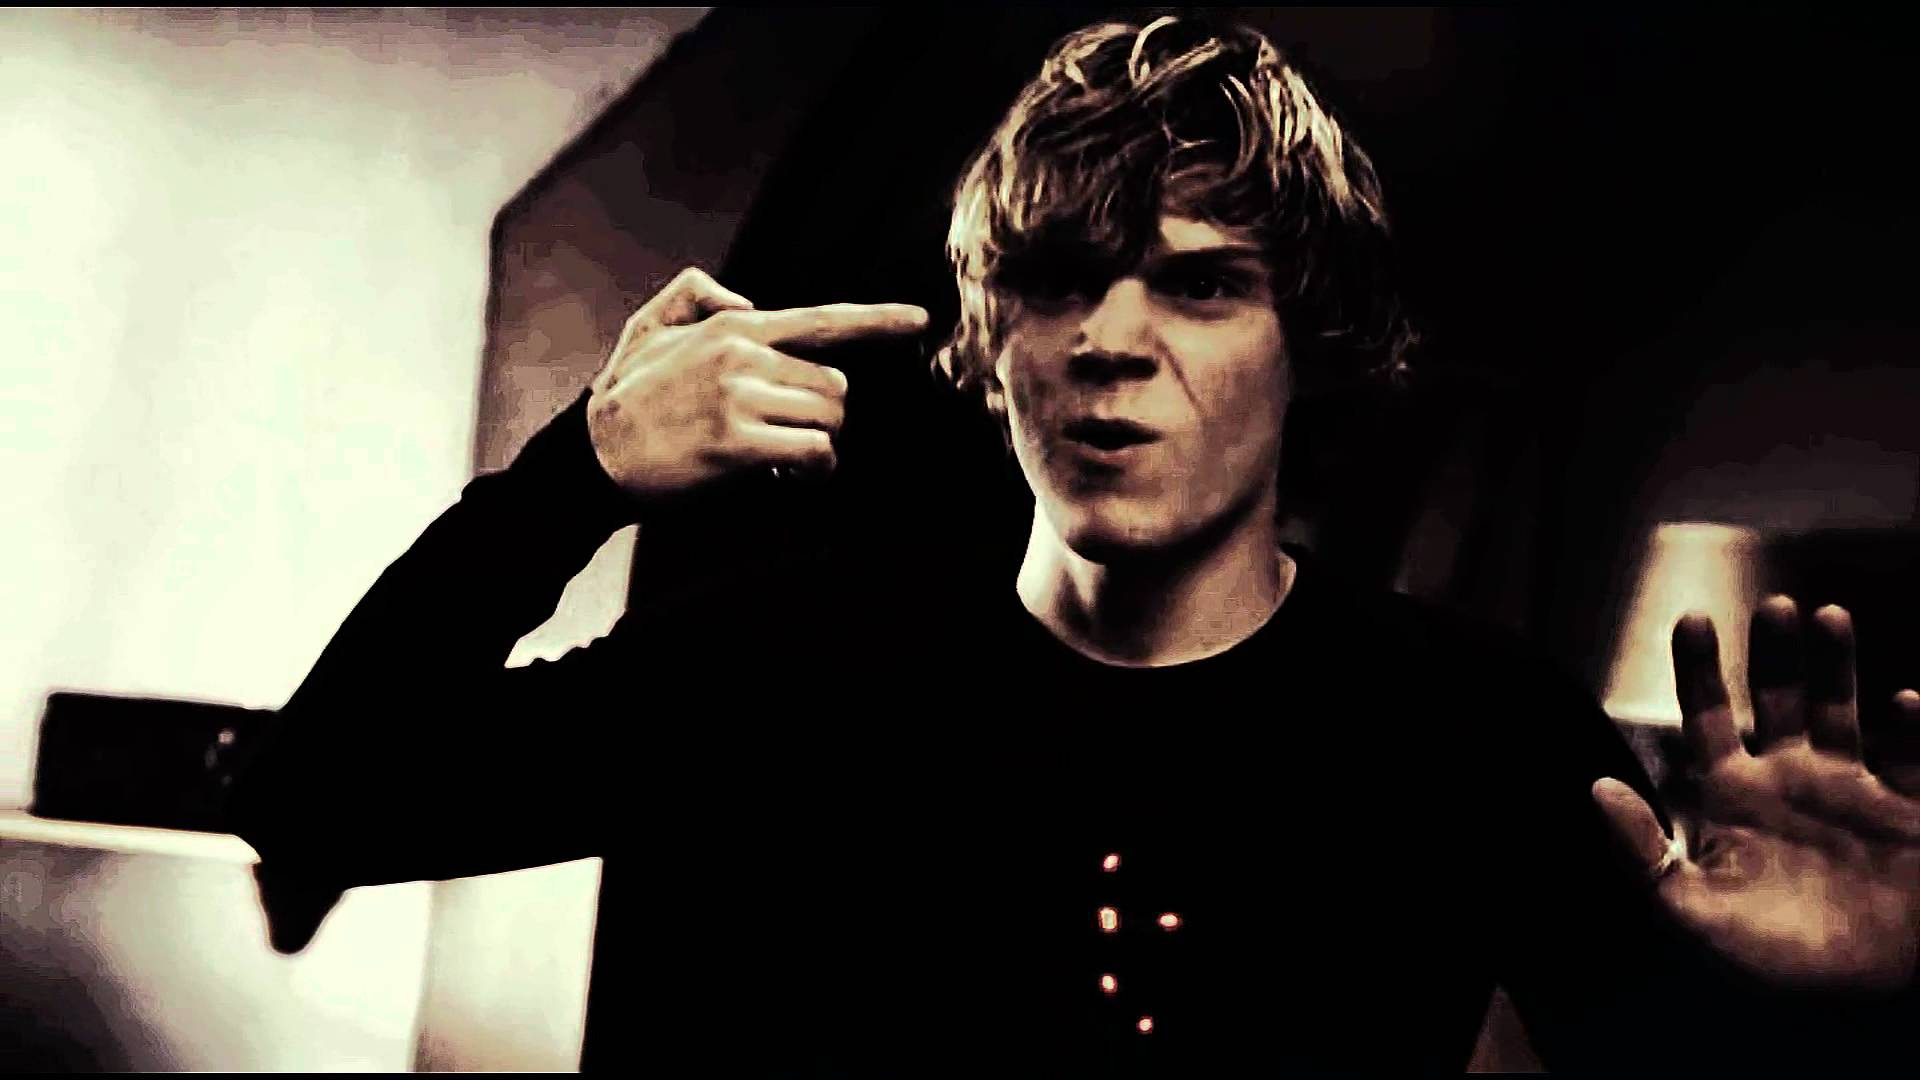 Pin on EVAN PETERS AESTHETIC CUTE HOT RARE ICON WALLPAPER